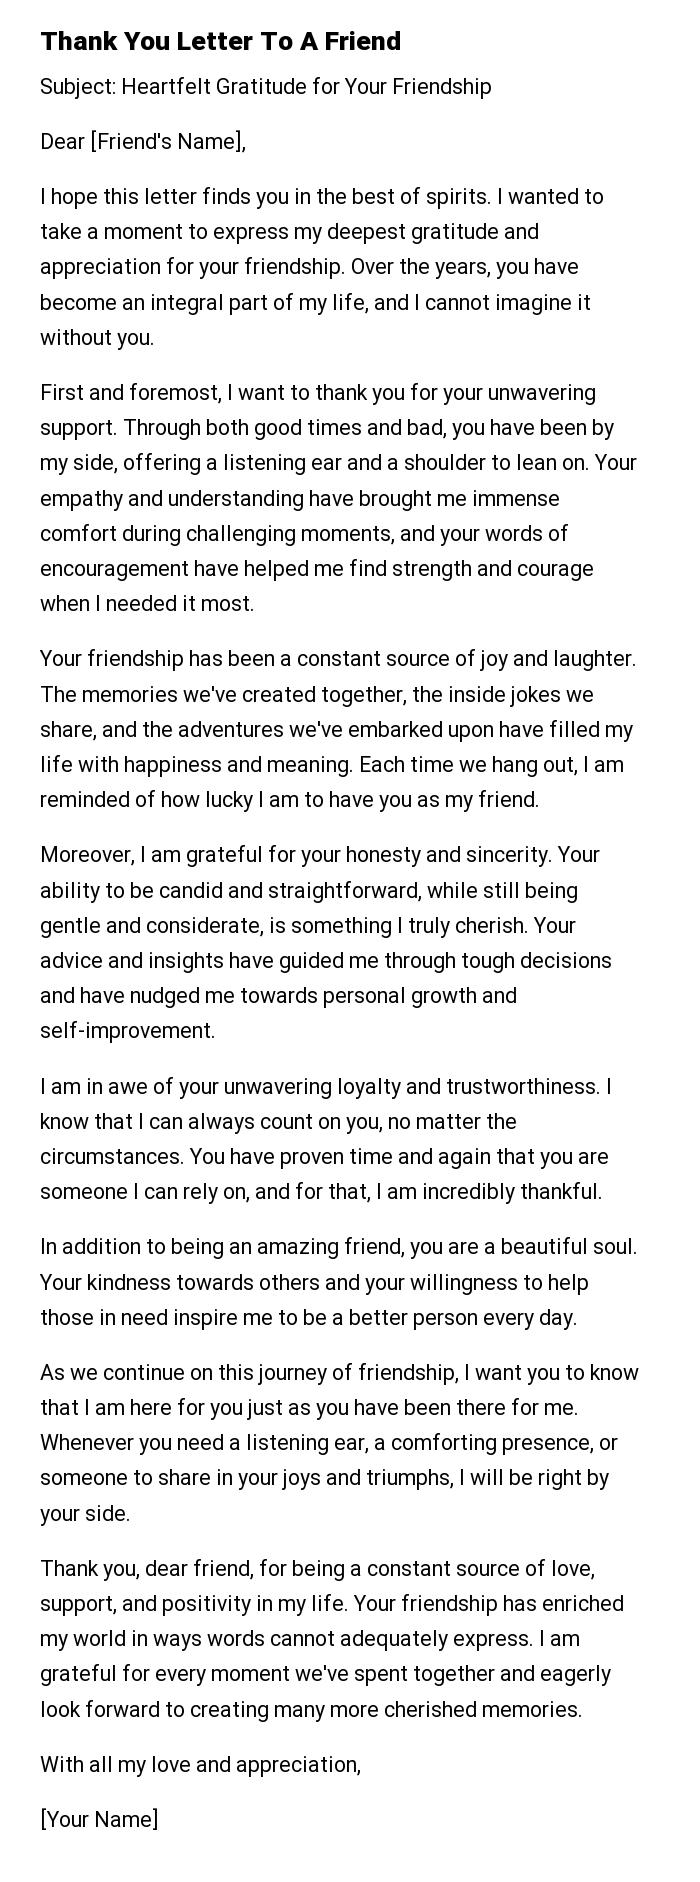 Thank You Letter To A Friend